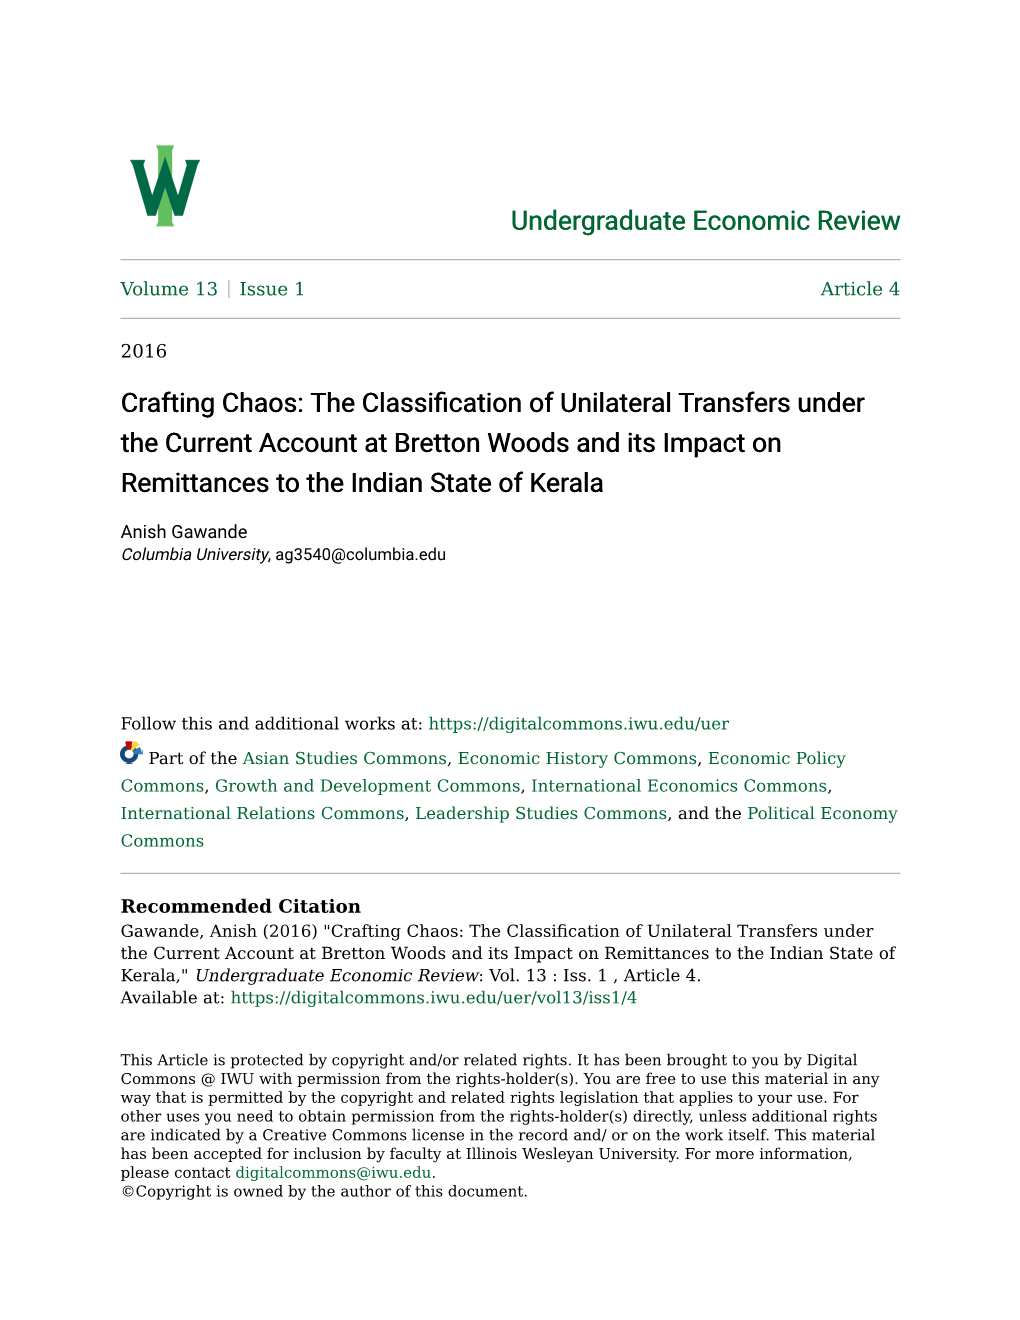 Crafting Chaos: the Classification of Unilateral Transfers Under the Current Account at Bretton Woods and Its Impact on Remittances to the Indian State of Kerala